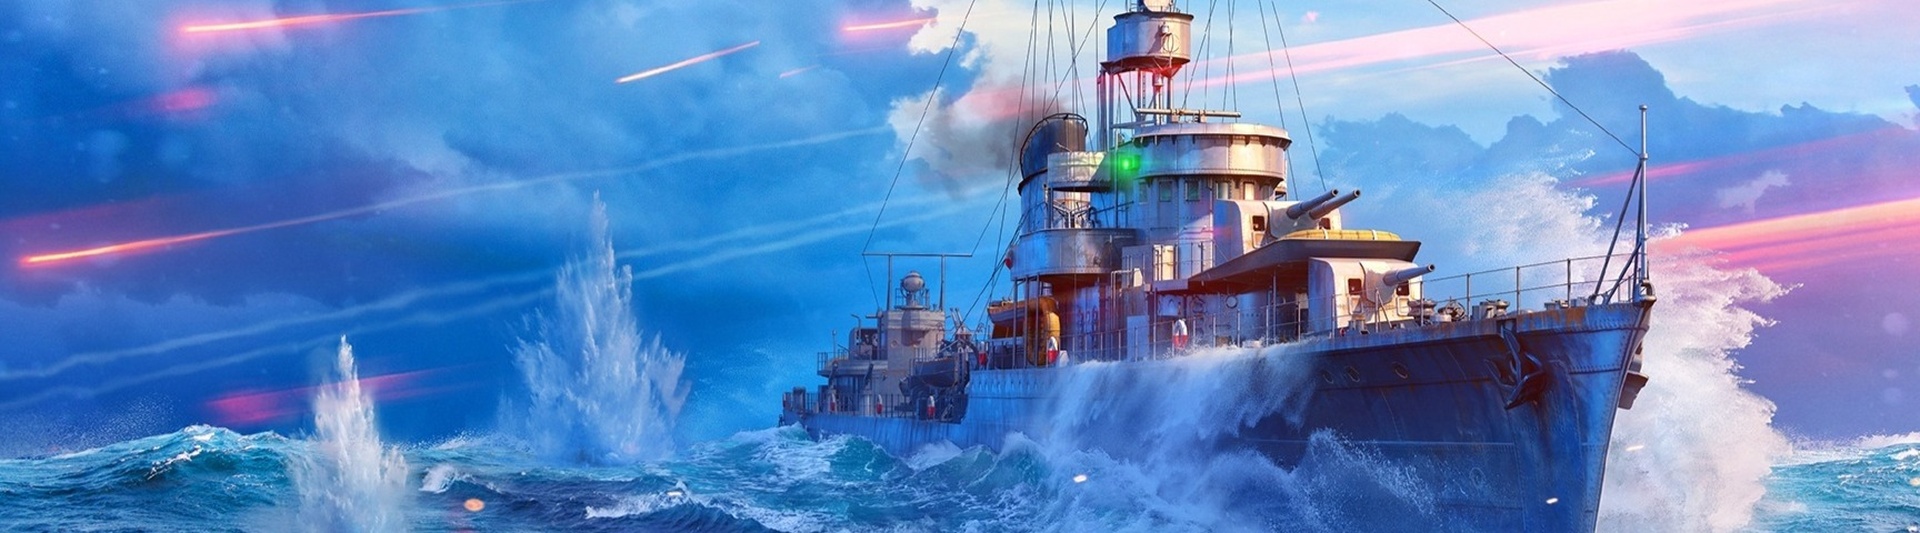 World of Warships Legends Trailer and Screens